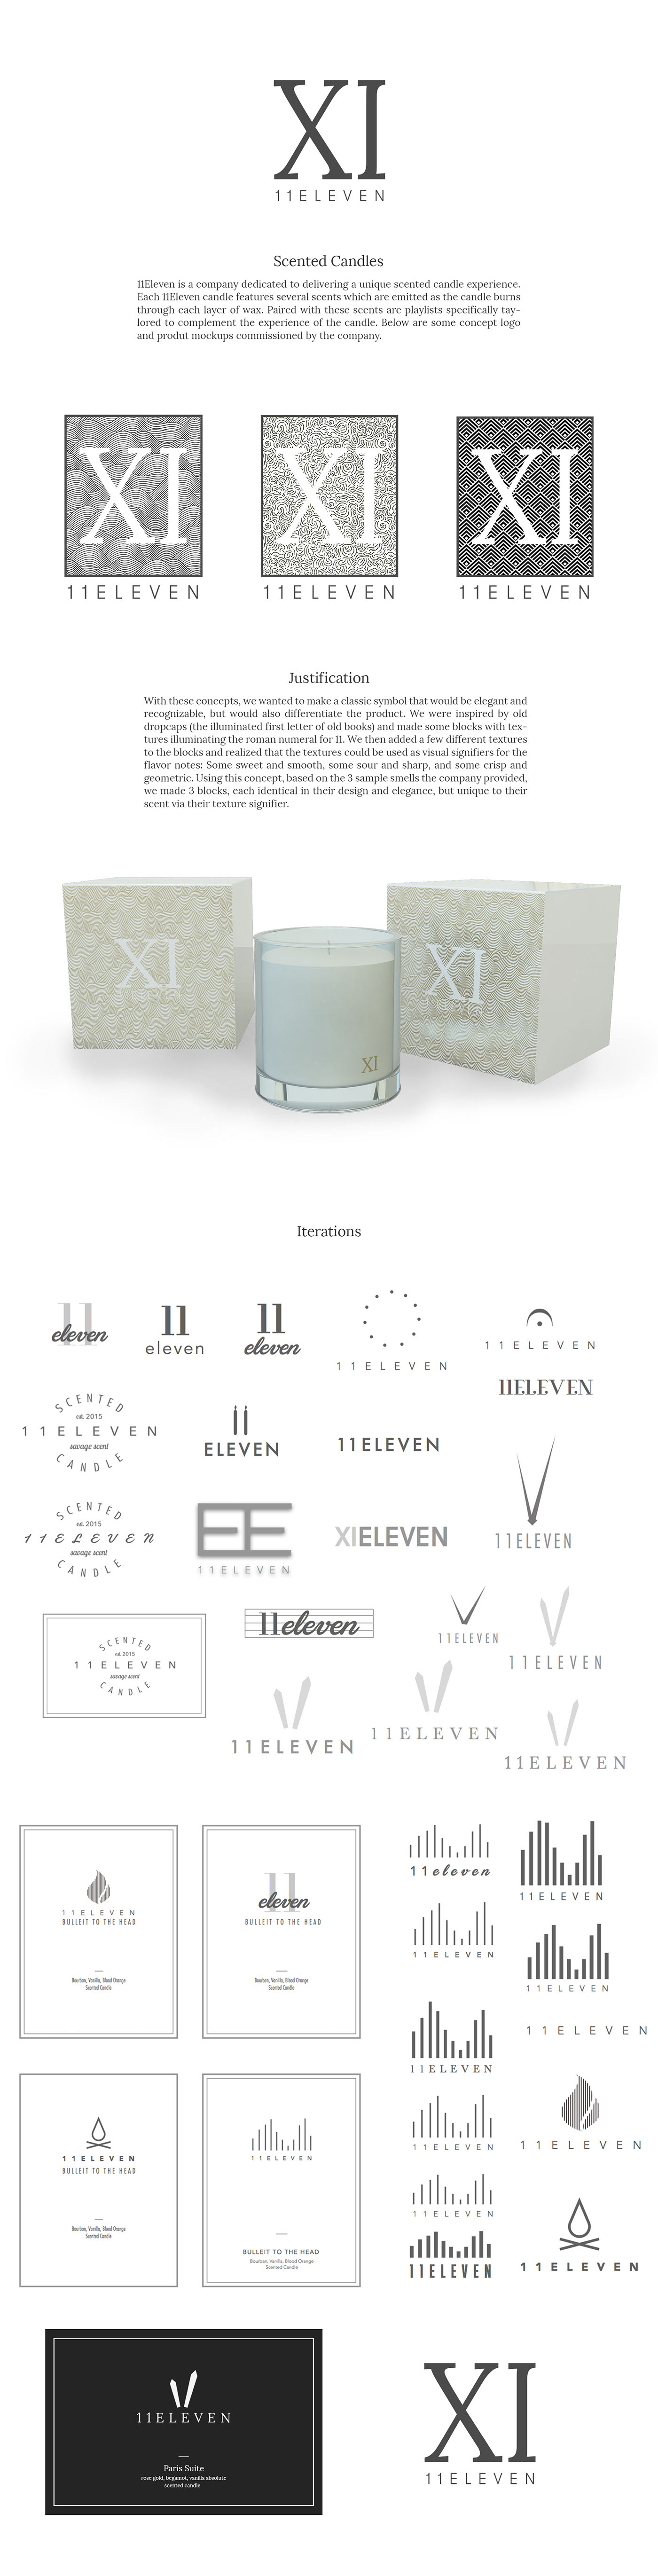 candle Scented 11eleven